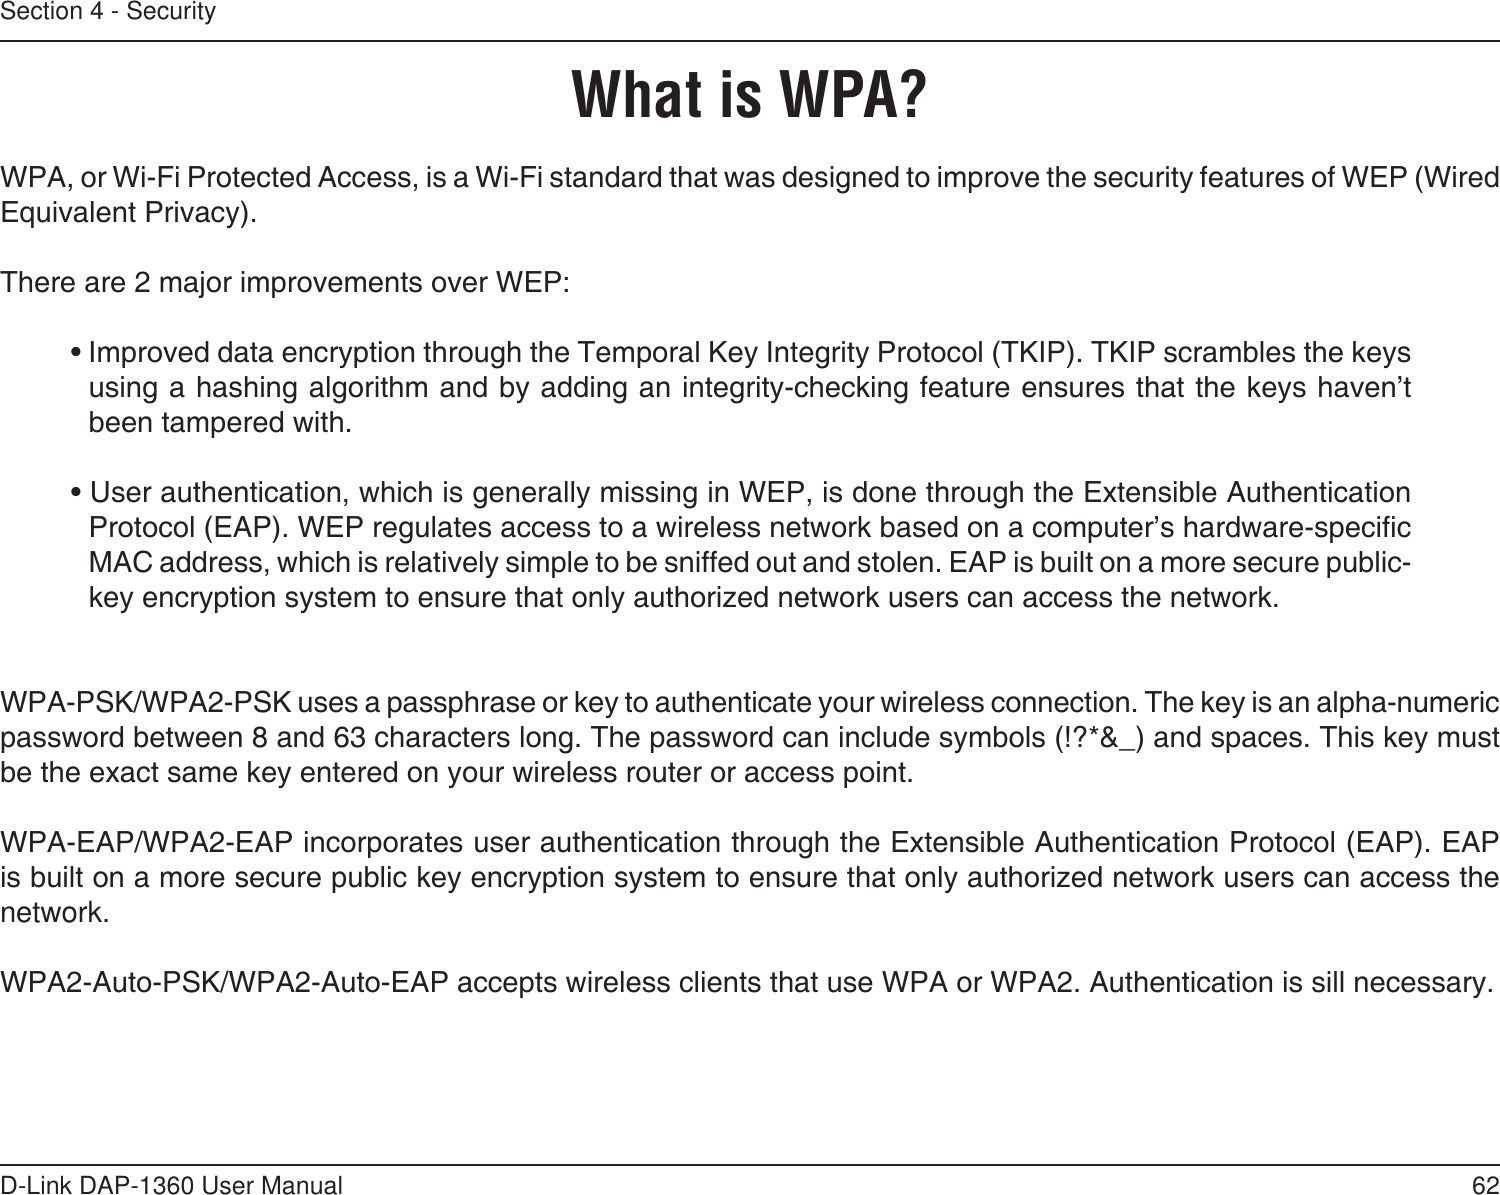 62D-Link DAP-1360 User ManualSection 4 - SecurityWhat is WPA?WPA, or Wi-Fi Protected Access, is a Wi-Fi standard that was designed to improve the security features of WEP (Wired Equivalent Privacy).  There are 2 major improvements over WEP: • Improved data encryption through the Temporal Key Integrity Protocol (TKIP). TKIP scrambles the keys using a hashing algorithm and by adding an integrity-checking feature ensures that the keys haven’t been tampered with. • User authentication, which is generally missing in WEP, is done through the Extensible Authentication Protocol (EAP). WEP regulates access to a wireless network based on a computer’s hardware-specic MAC address, which is relatively simple to be sniffed out and stolen. EAP is built on a more secure public-key encryption system to ensure that only authorized network users can access the network.WPA-PSK/WPA2-PSK uses a passphrase or key to authenticate your wireless connection. The key is an alpha-numeric password between 8 and 63 characters long. The password can include symbols (!?*&amp;_) and spaces. This key must be the exact same key entered on your wireless router or access point.WPA-EAP/WPA2-EAP incorporates user authentication through the Extensible Authentication Protocol (EAP). EAP is built on a more secure public key encryption system to ensure that only authorized network users can access the network.WPA2-Auto-PSK/WPA2-Auto-EAP accepts wireless clients that use WPA or WPA2. Authentication is sill necessary.